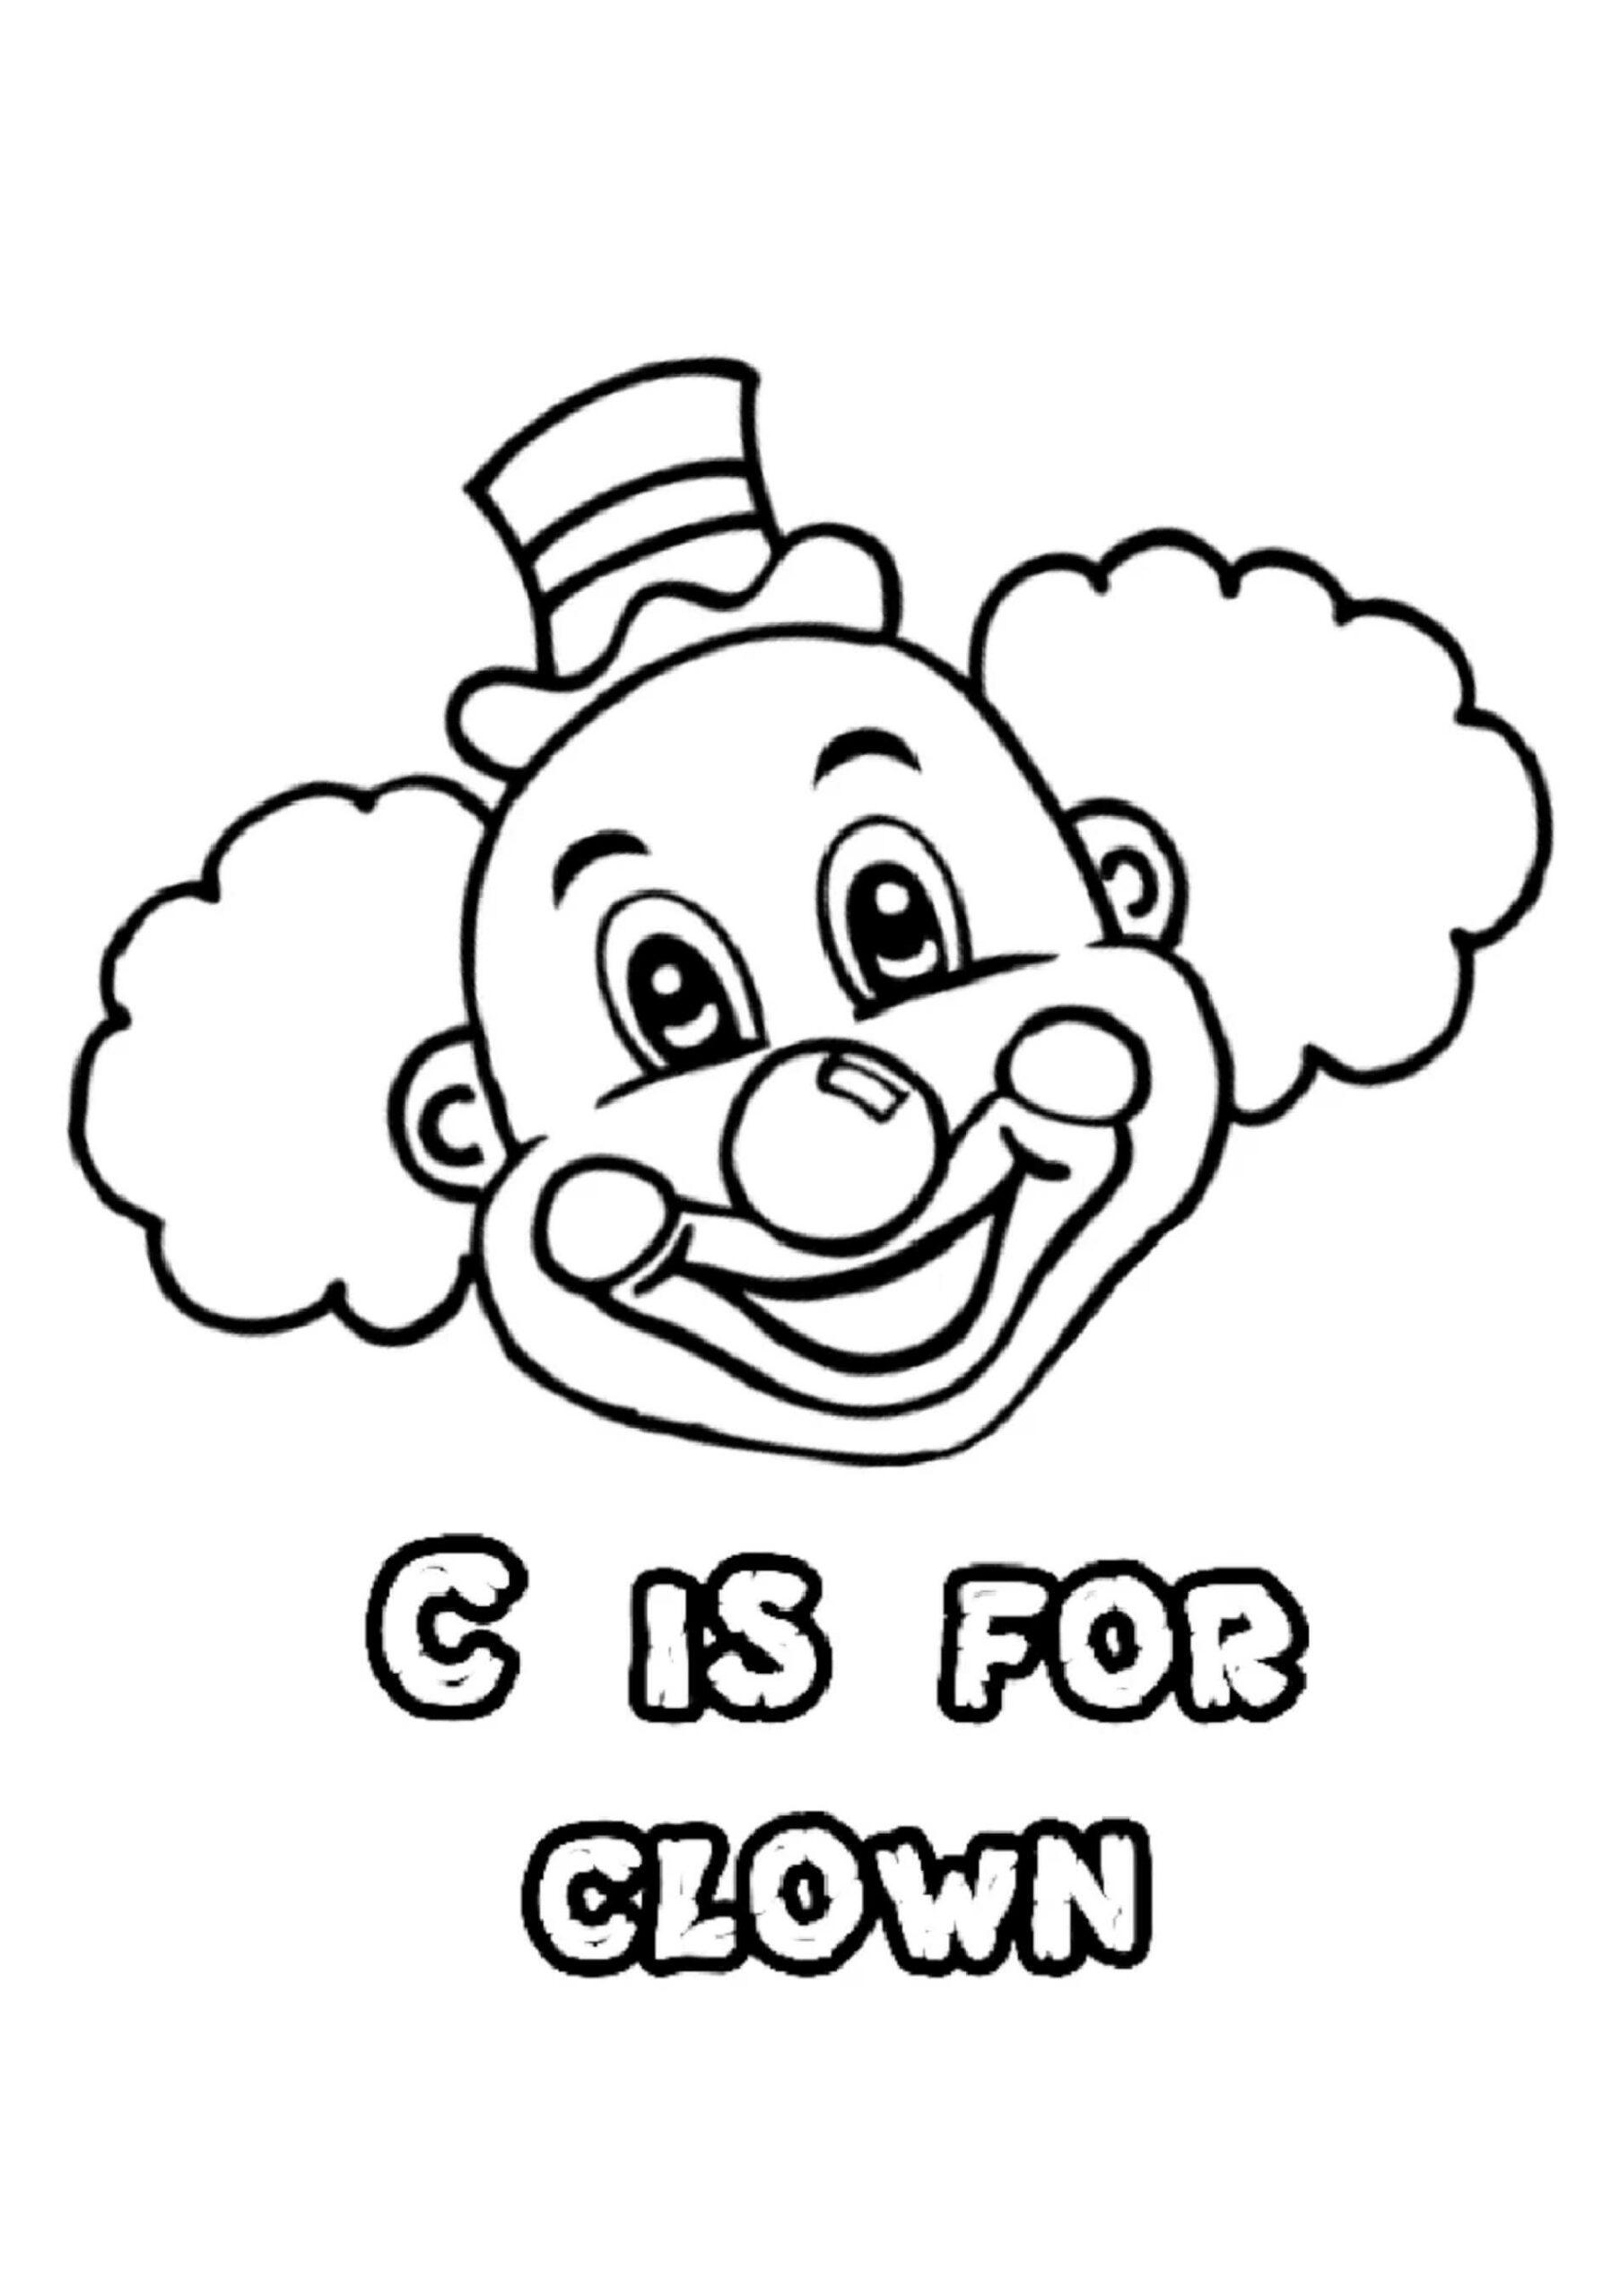 C is for clown coloring page